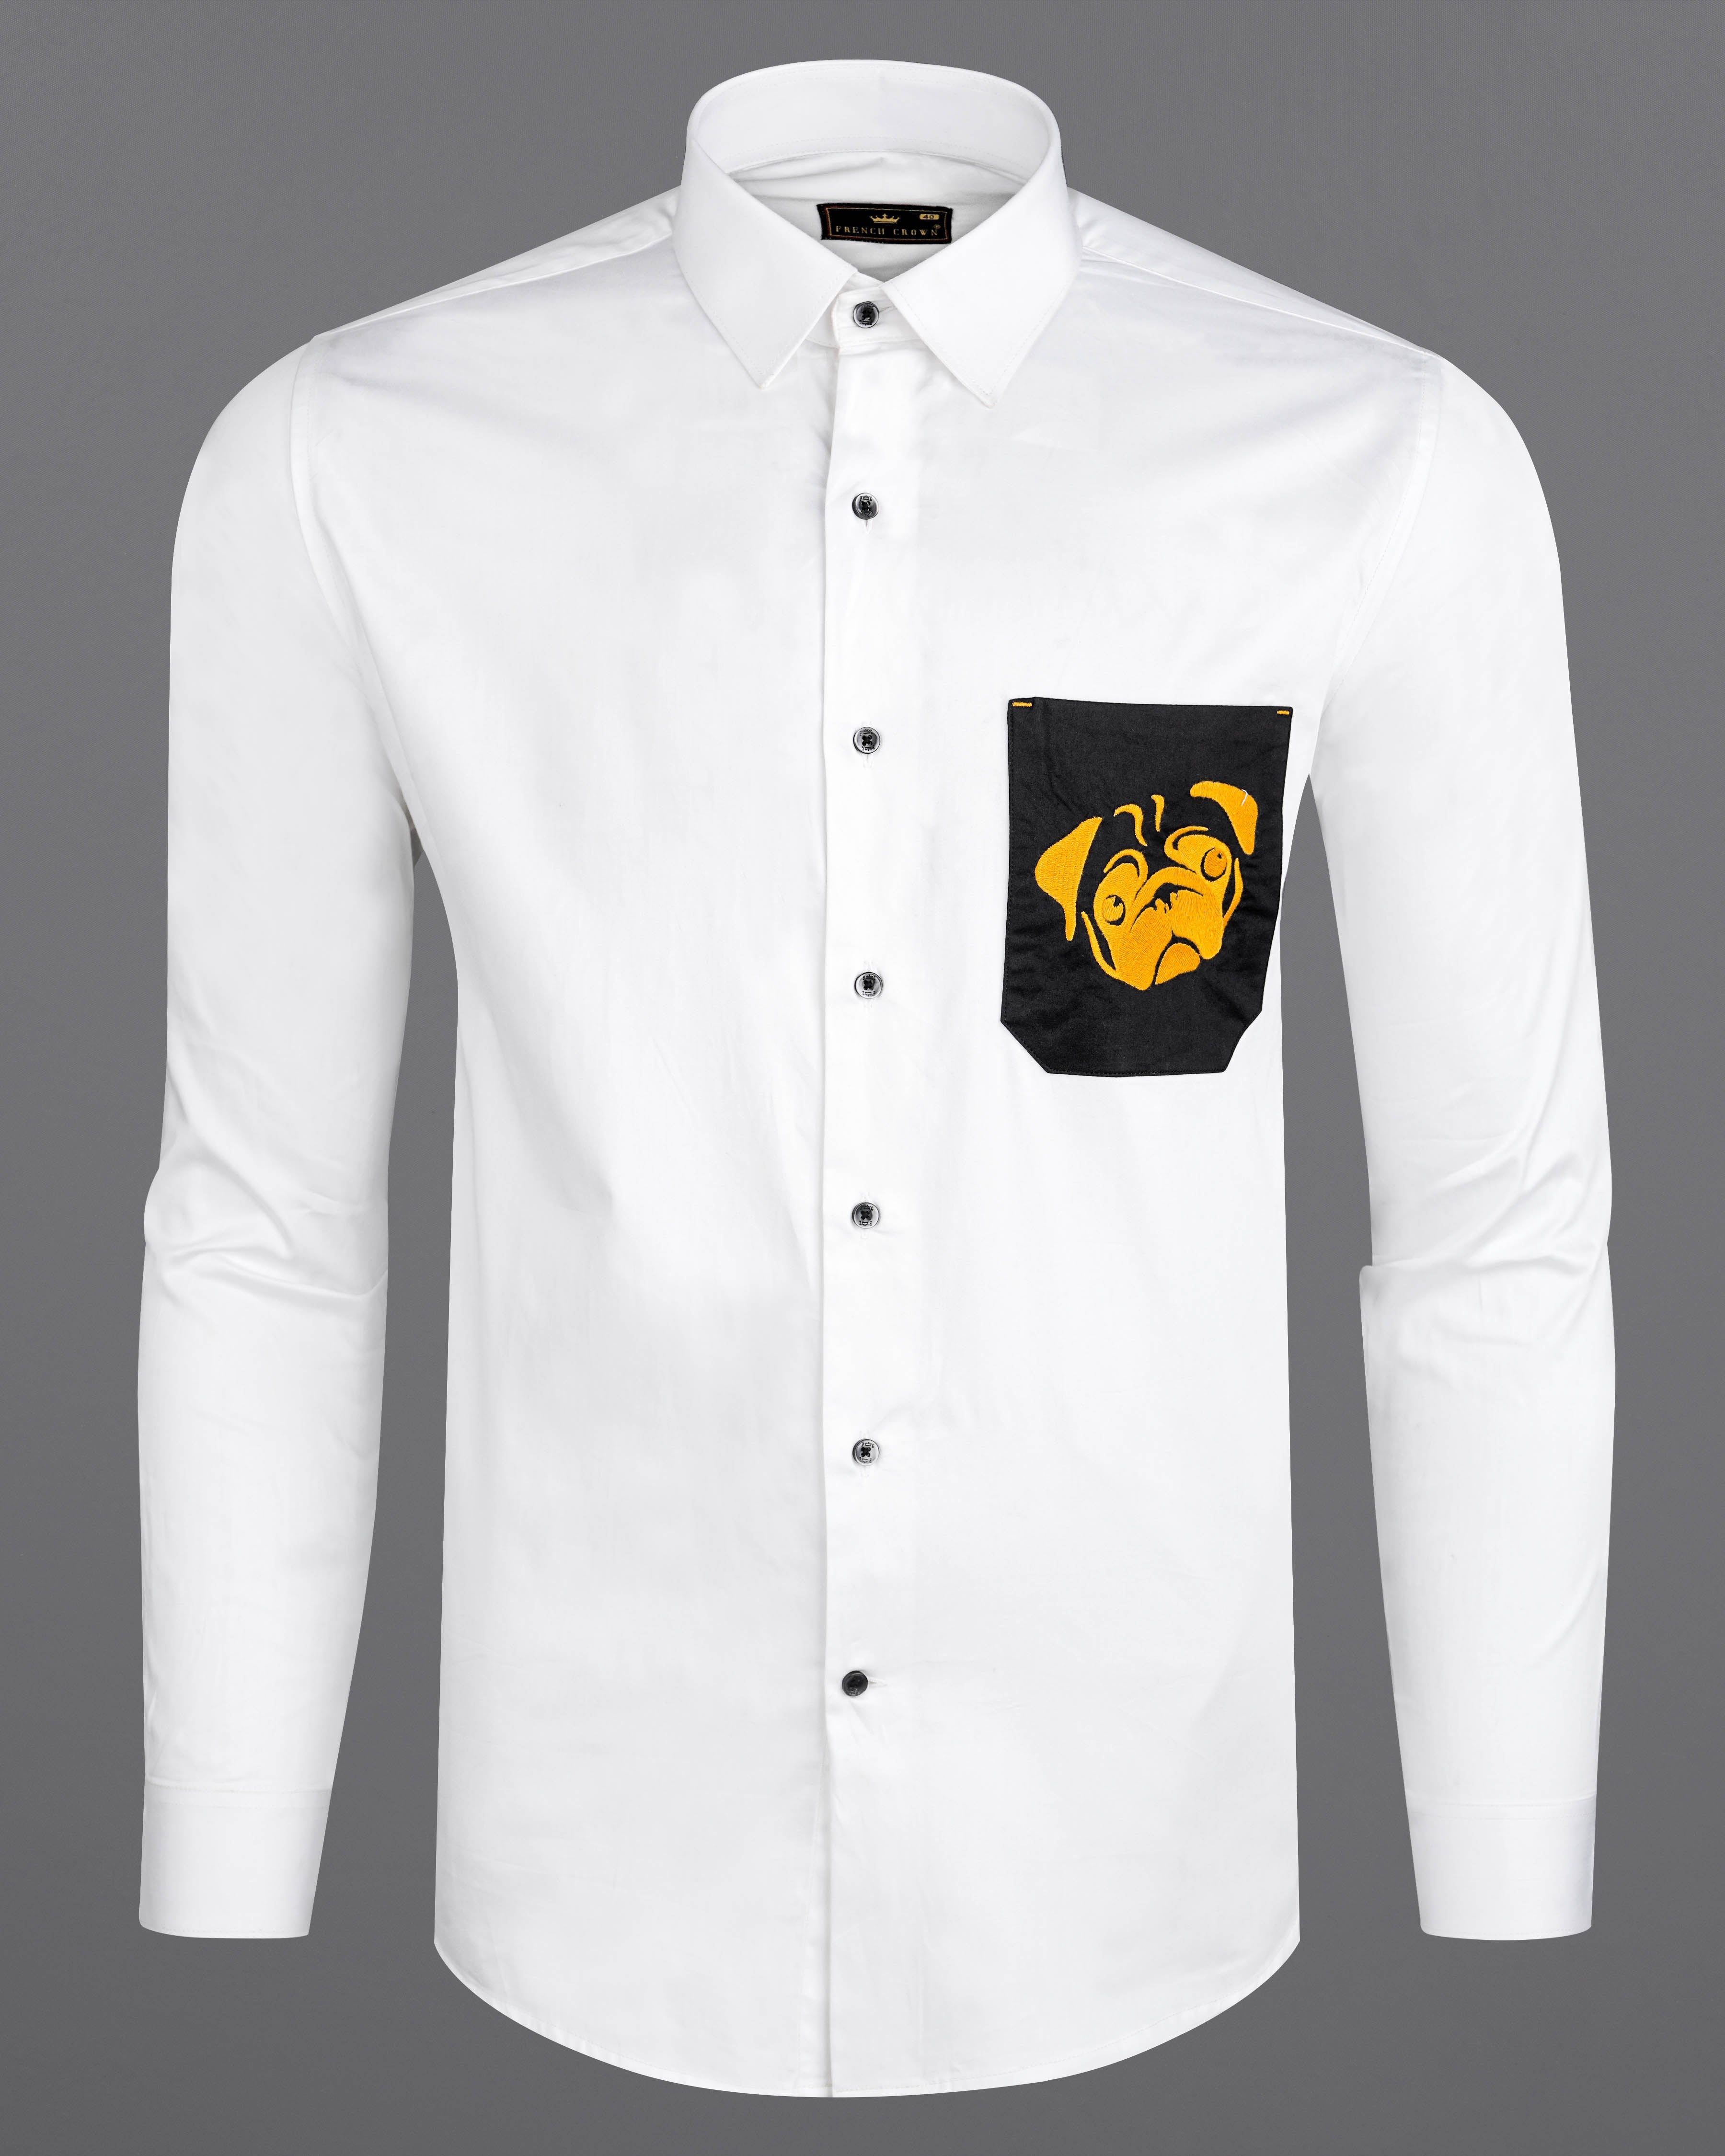 Bright White Subtle Sheen with Black Pocket and Puppy Embroidered Super Soft Premium Cotton Shirt 1062-BLK-P492-38,1062-BLK-P492-H-38,1062-BLK-P492-39,1062-BLK-P492-H-39,1062-BLK-P492-40,1062-BLK-P492-H-40,1062-BLK-P492-42,1062-BLK-P492-H-42,1062-BLK-P492-44,1062-BLK-P492-H-44,1062-BLK-P492-46,1062-BLK-P492-H-46,1062-BLK-P492-48,1062-BLK-P492-H-48,1062-BLK-P492-50,1062-BLK-P492-H-50,1062-BLK-P492-52,1062-BLK-P492-H-52